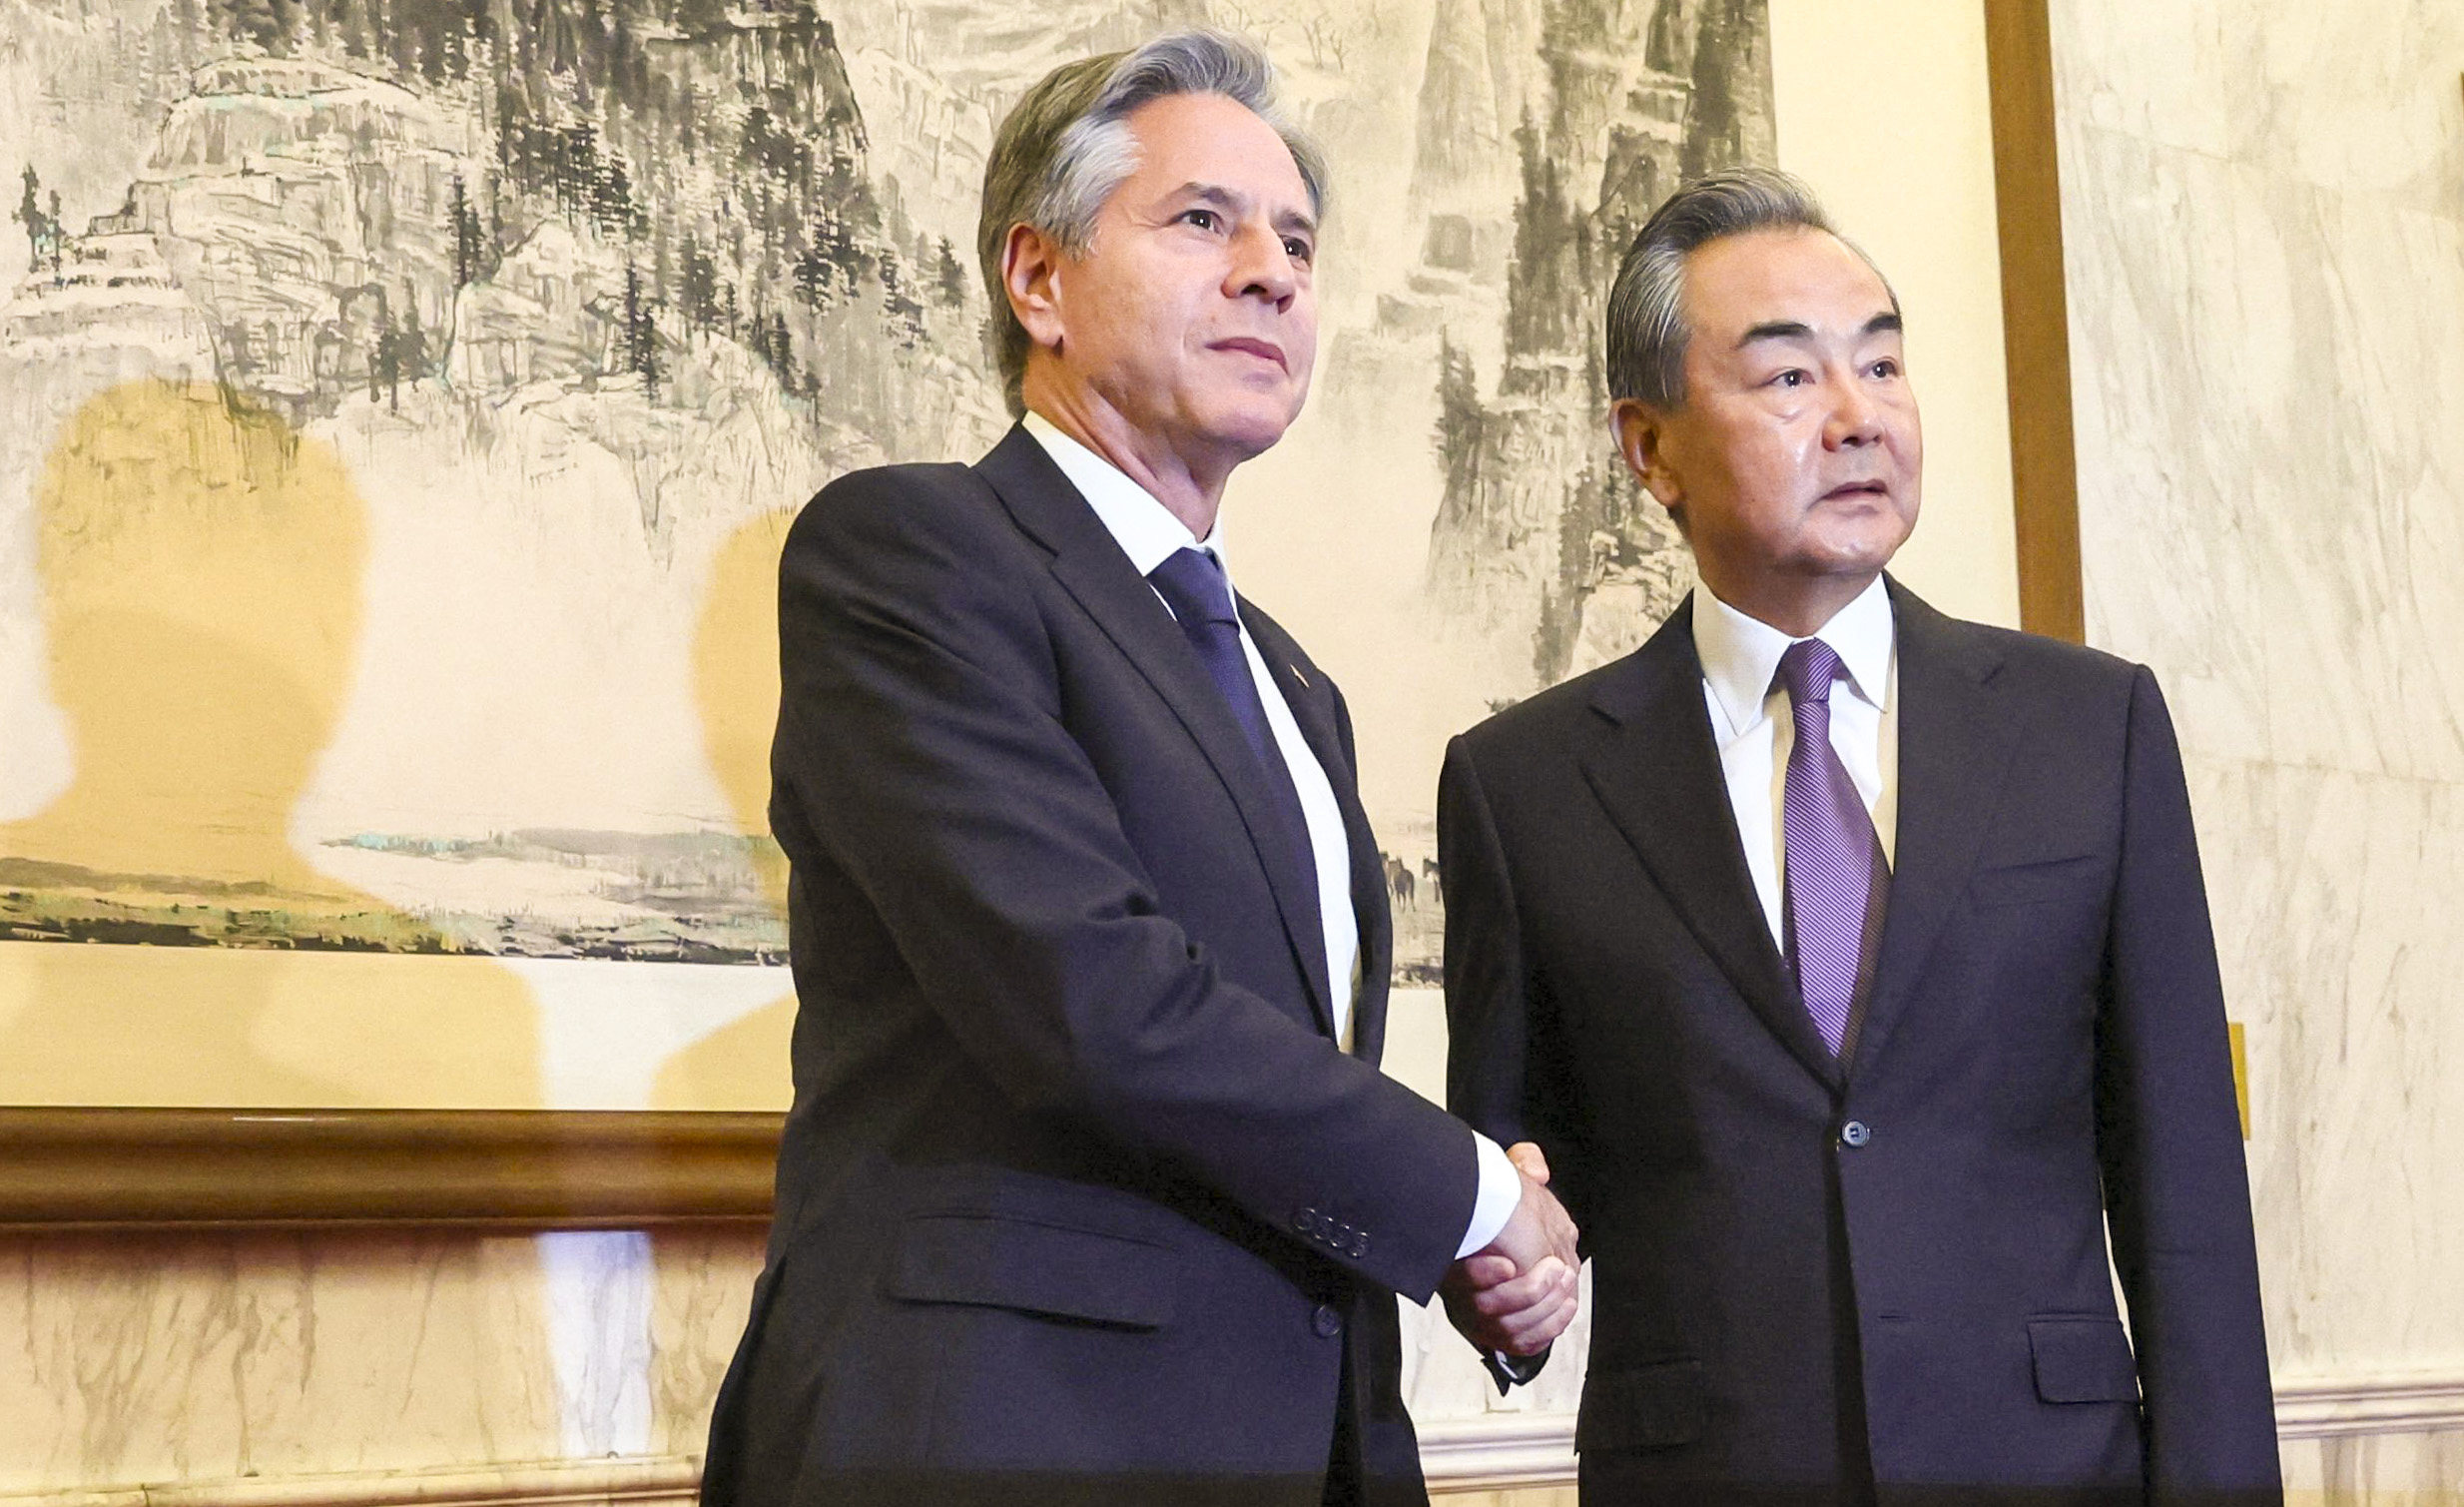 US Secretary of State Antony Blinken (L) shakes hands with China’s Director of the Office of the Central Foreign Affairs Commission Wang Yi in Beijing on June 19, 2023. Photo: AFP